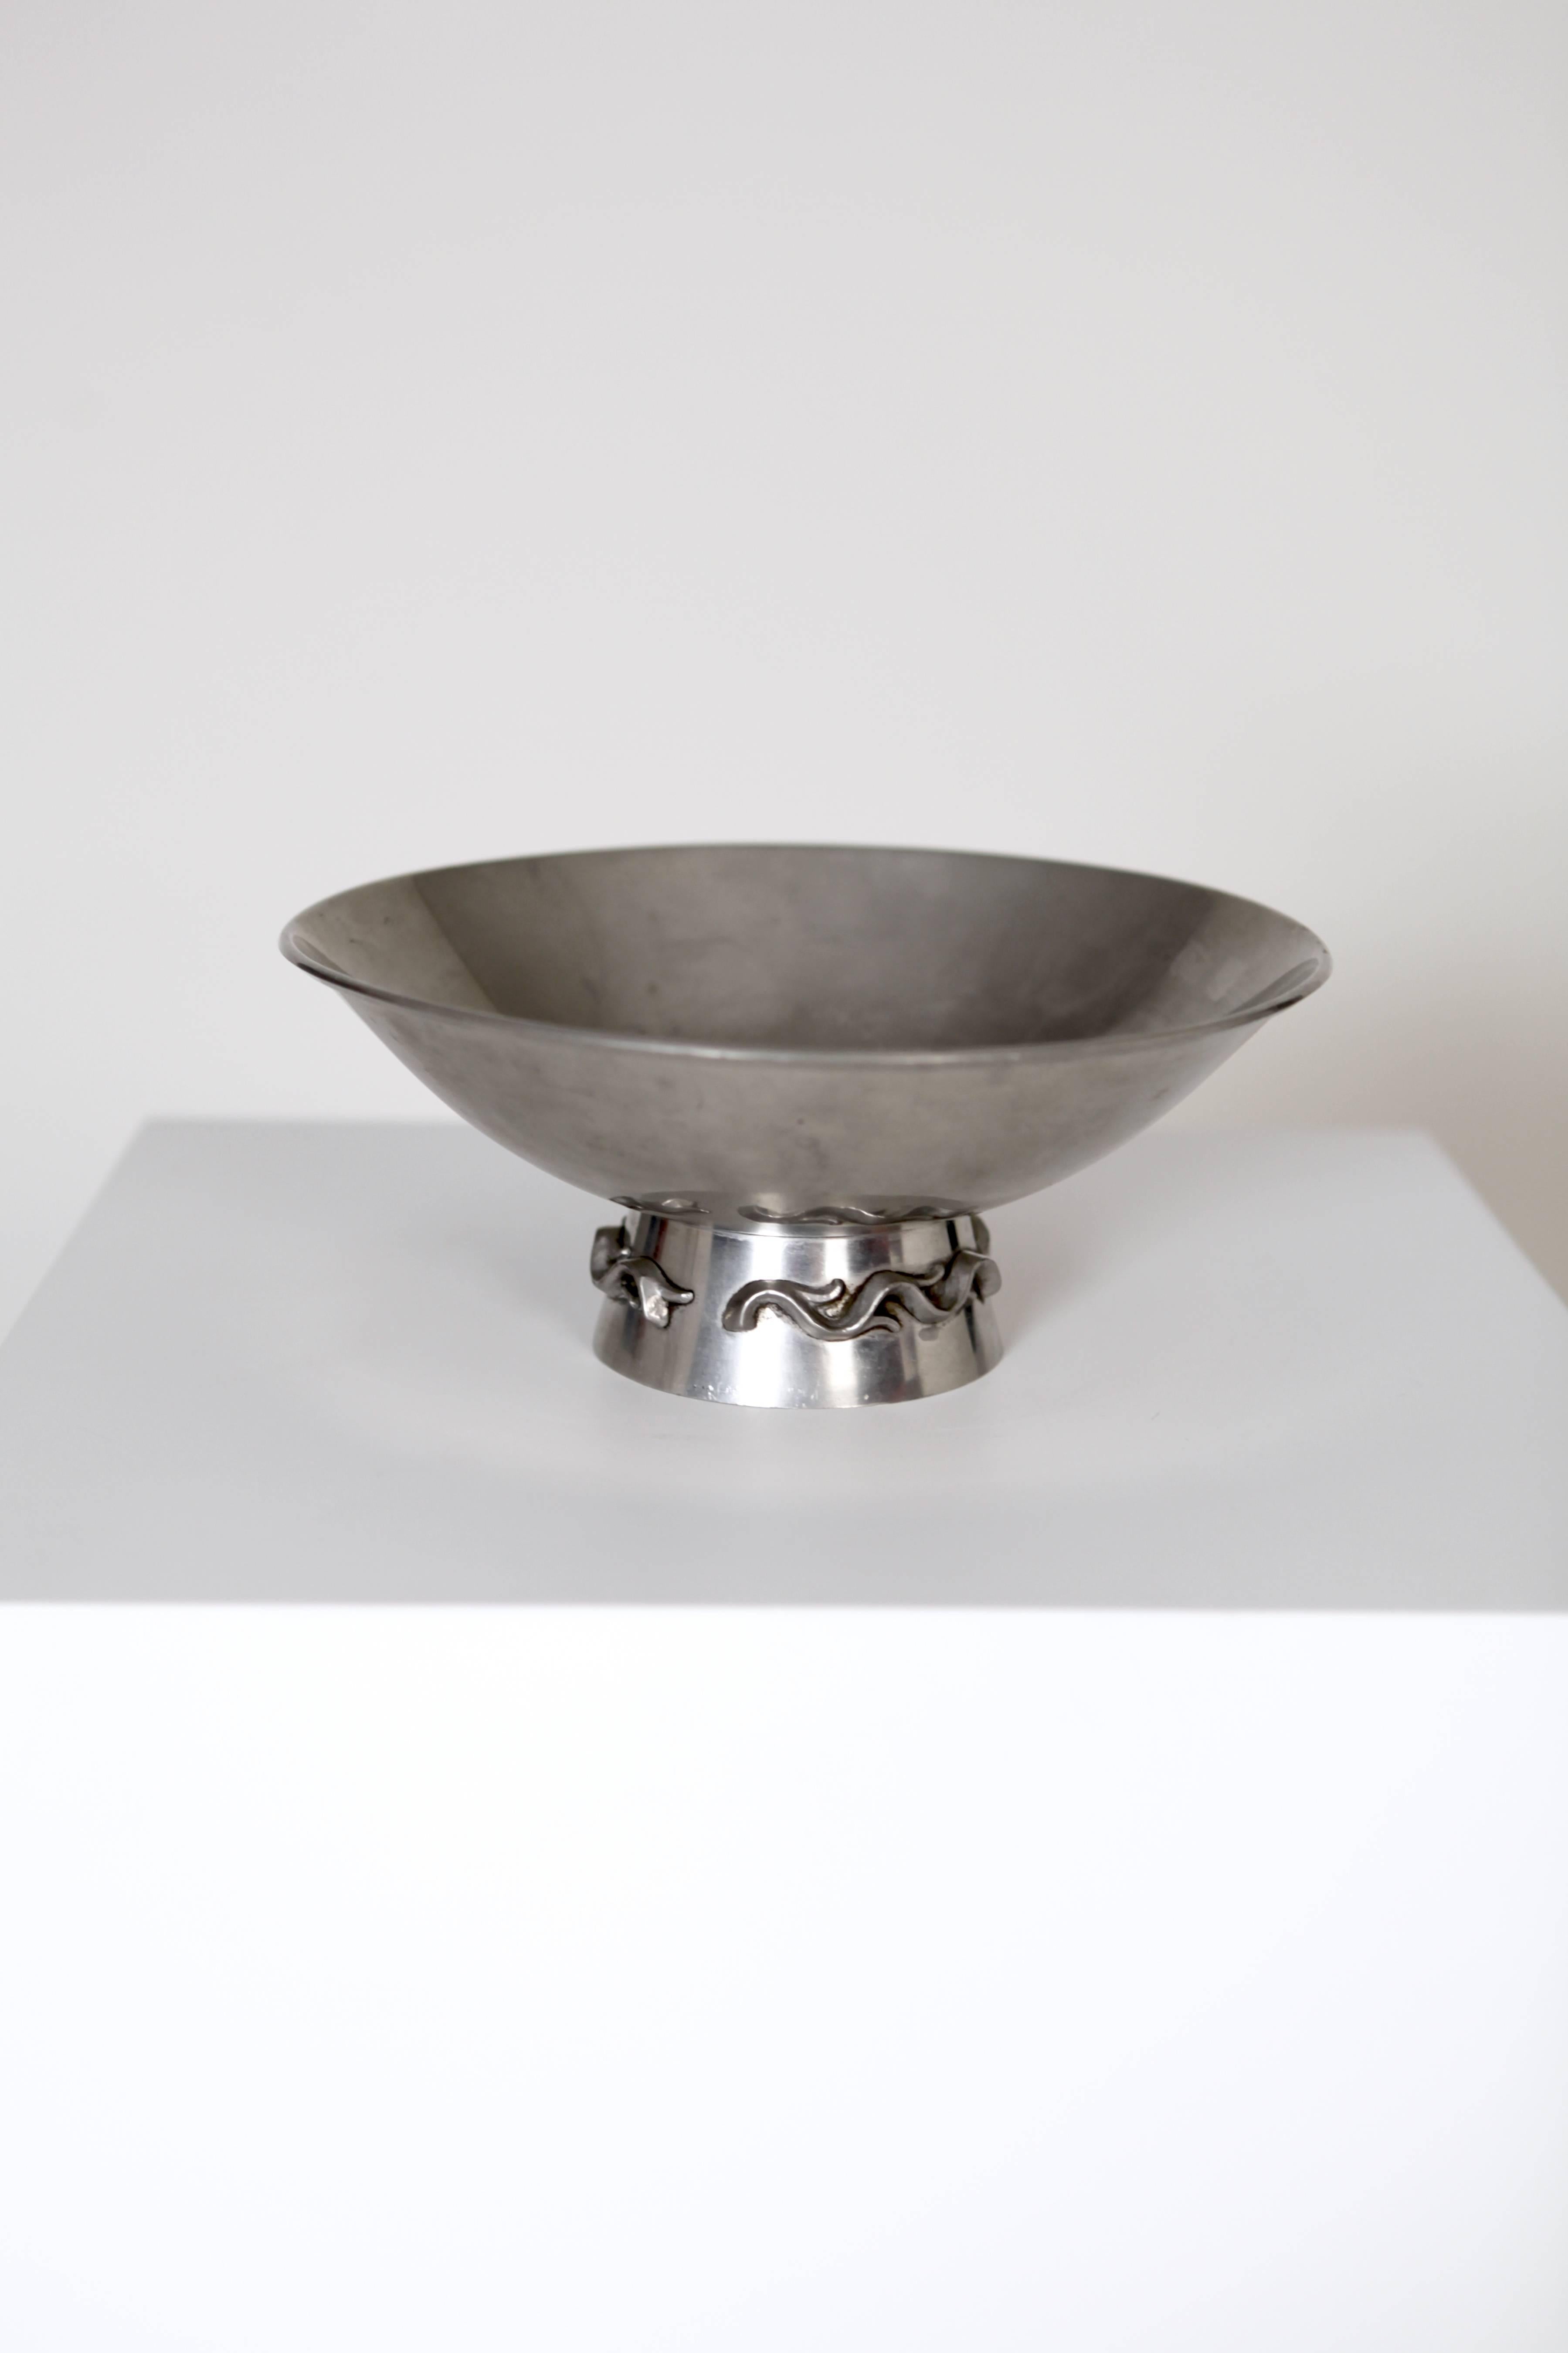 Paavo Tynell pewter bowl,
manufactured by Taito Oy, Finland, 1940s
signed.